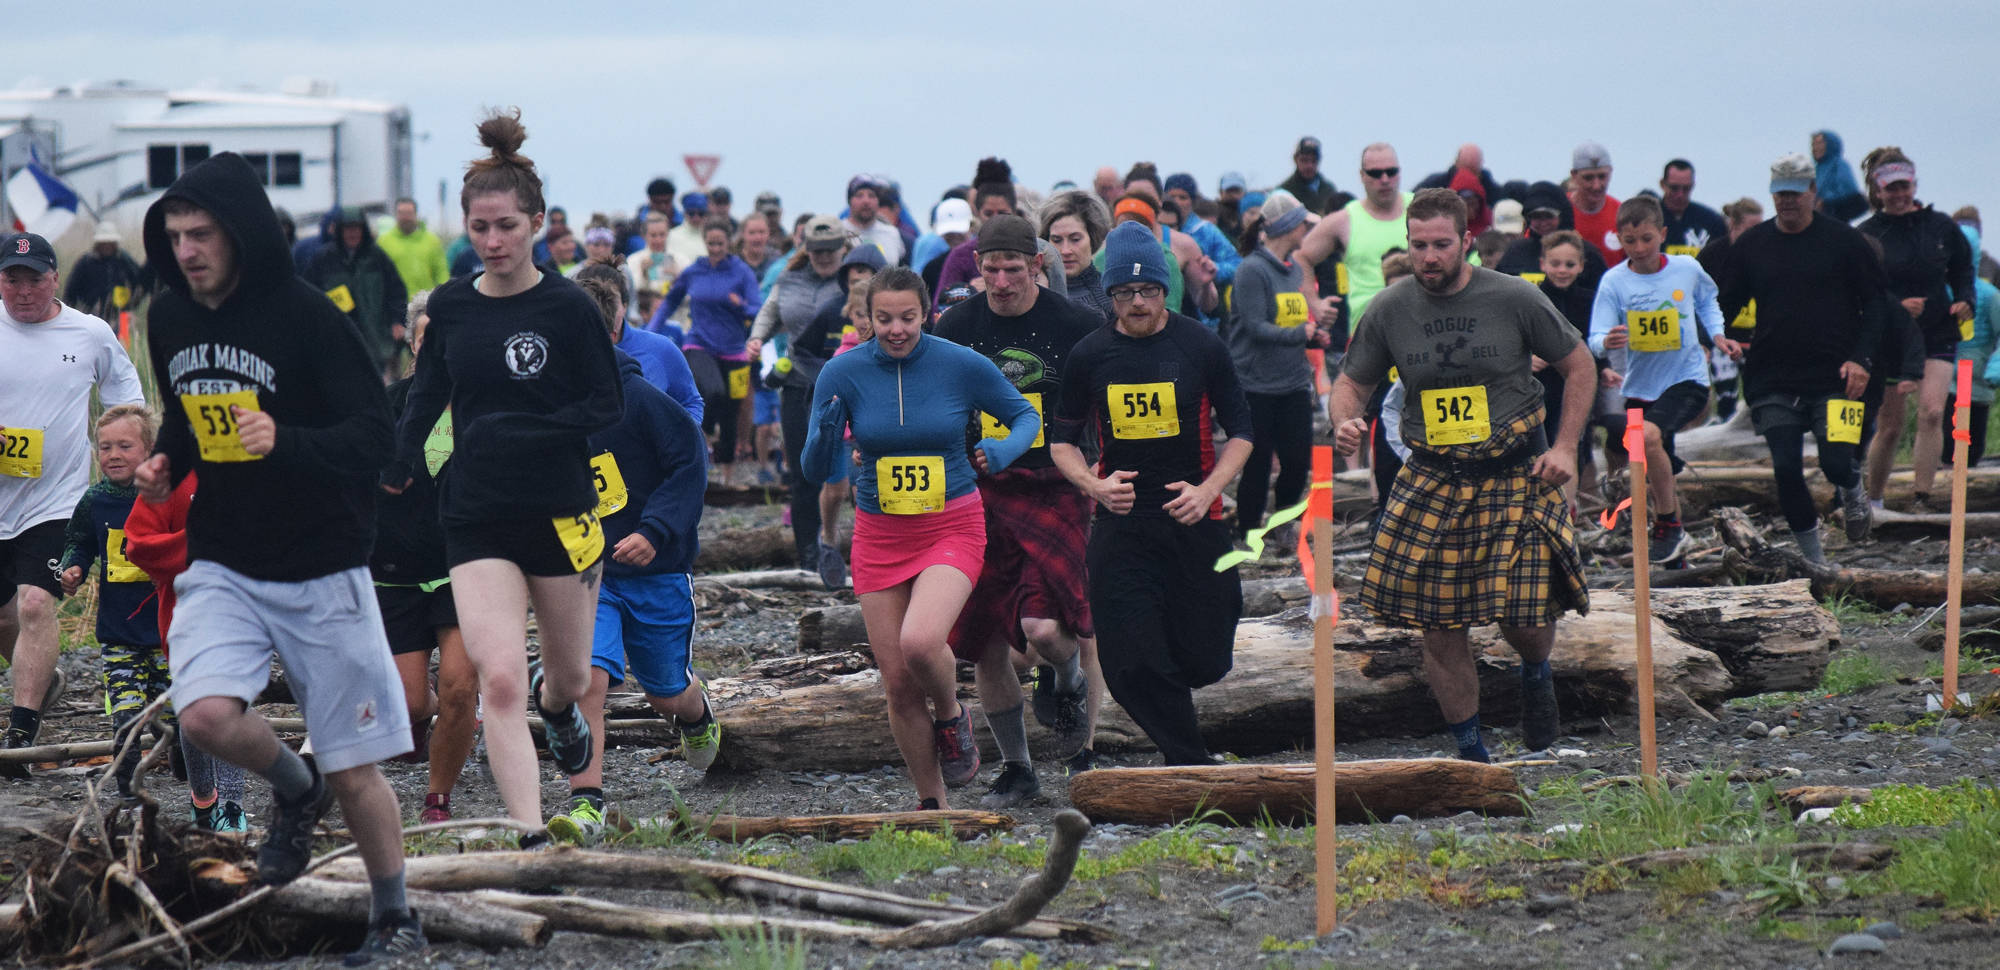 A field of 152 runners take off Saturday at the fourth annual Clam Scramble 5K in Ninilchik. (Photo by Joey Klecka/Peninsula Clarion)